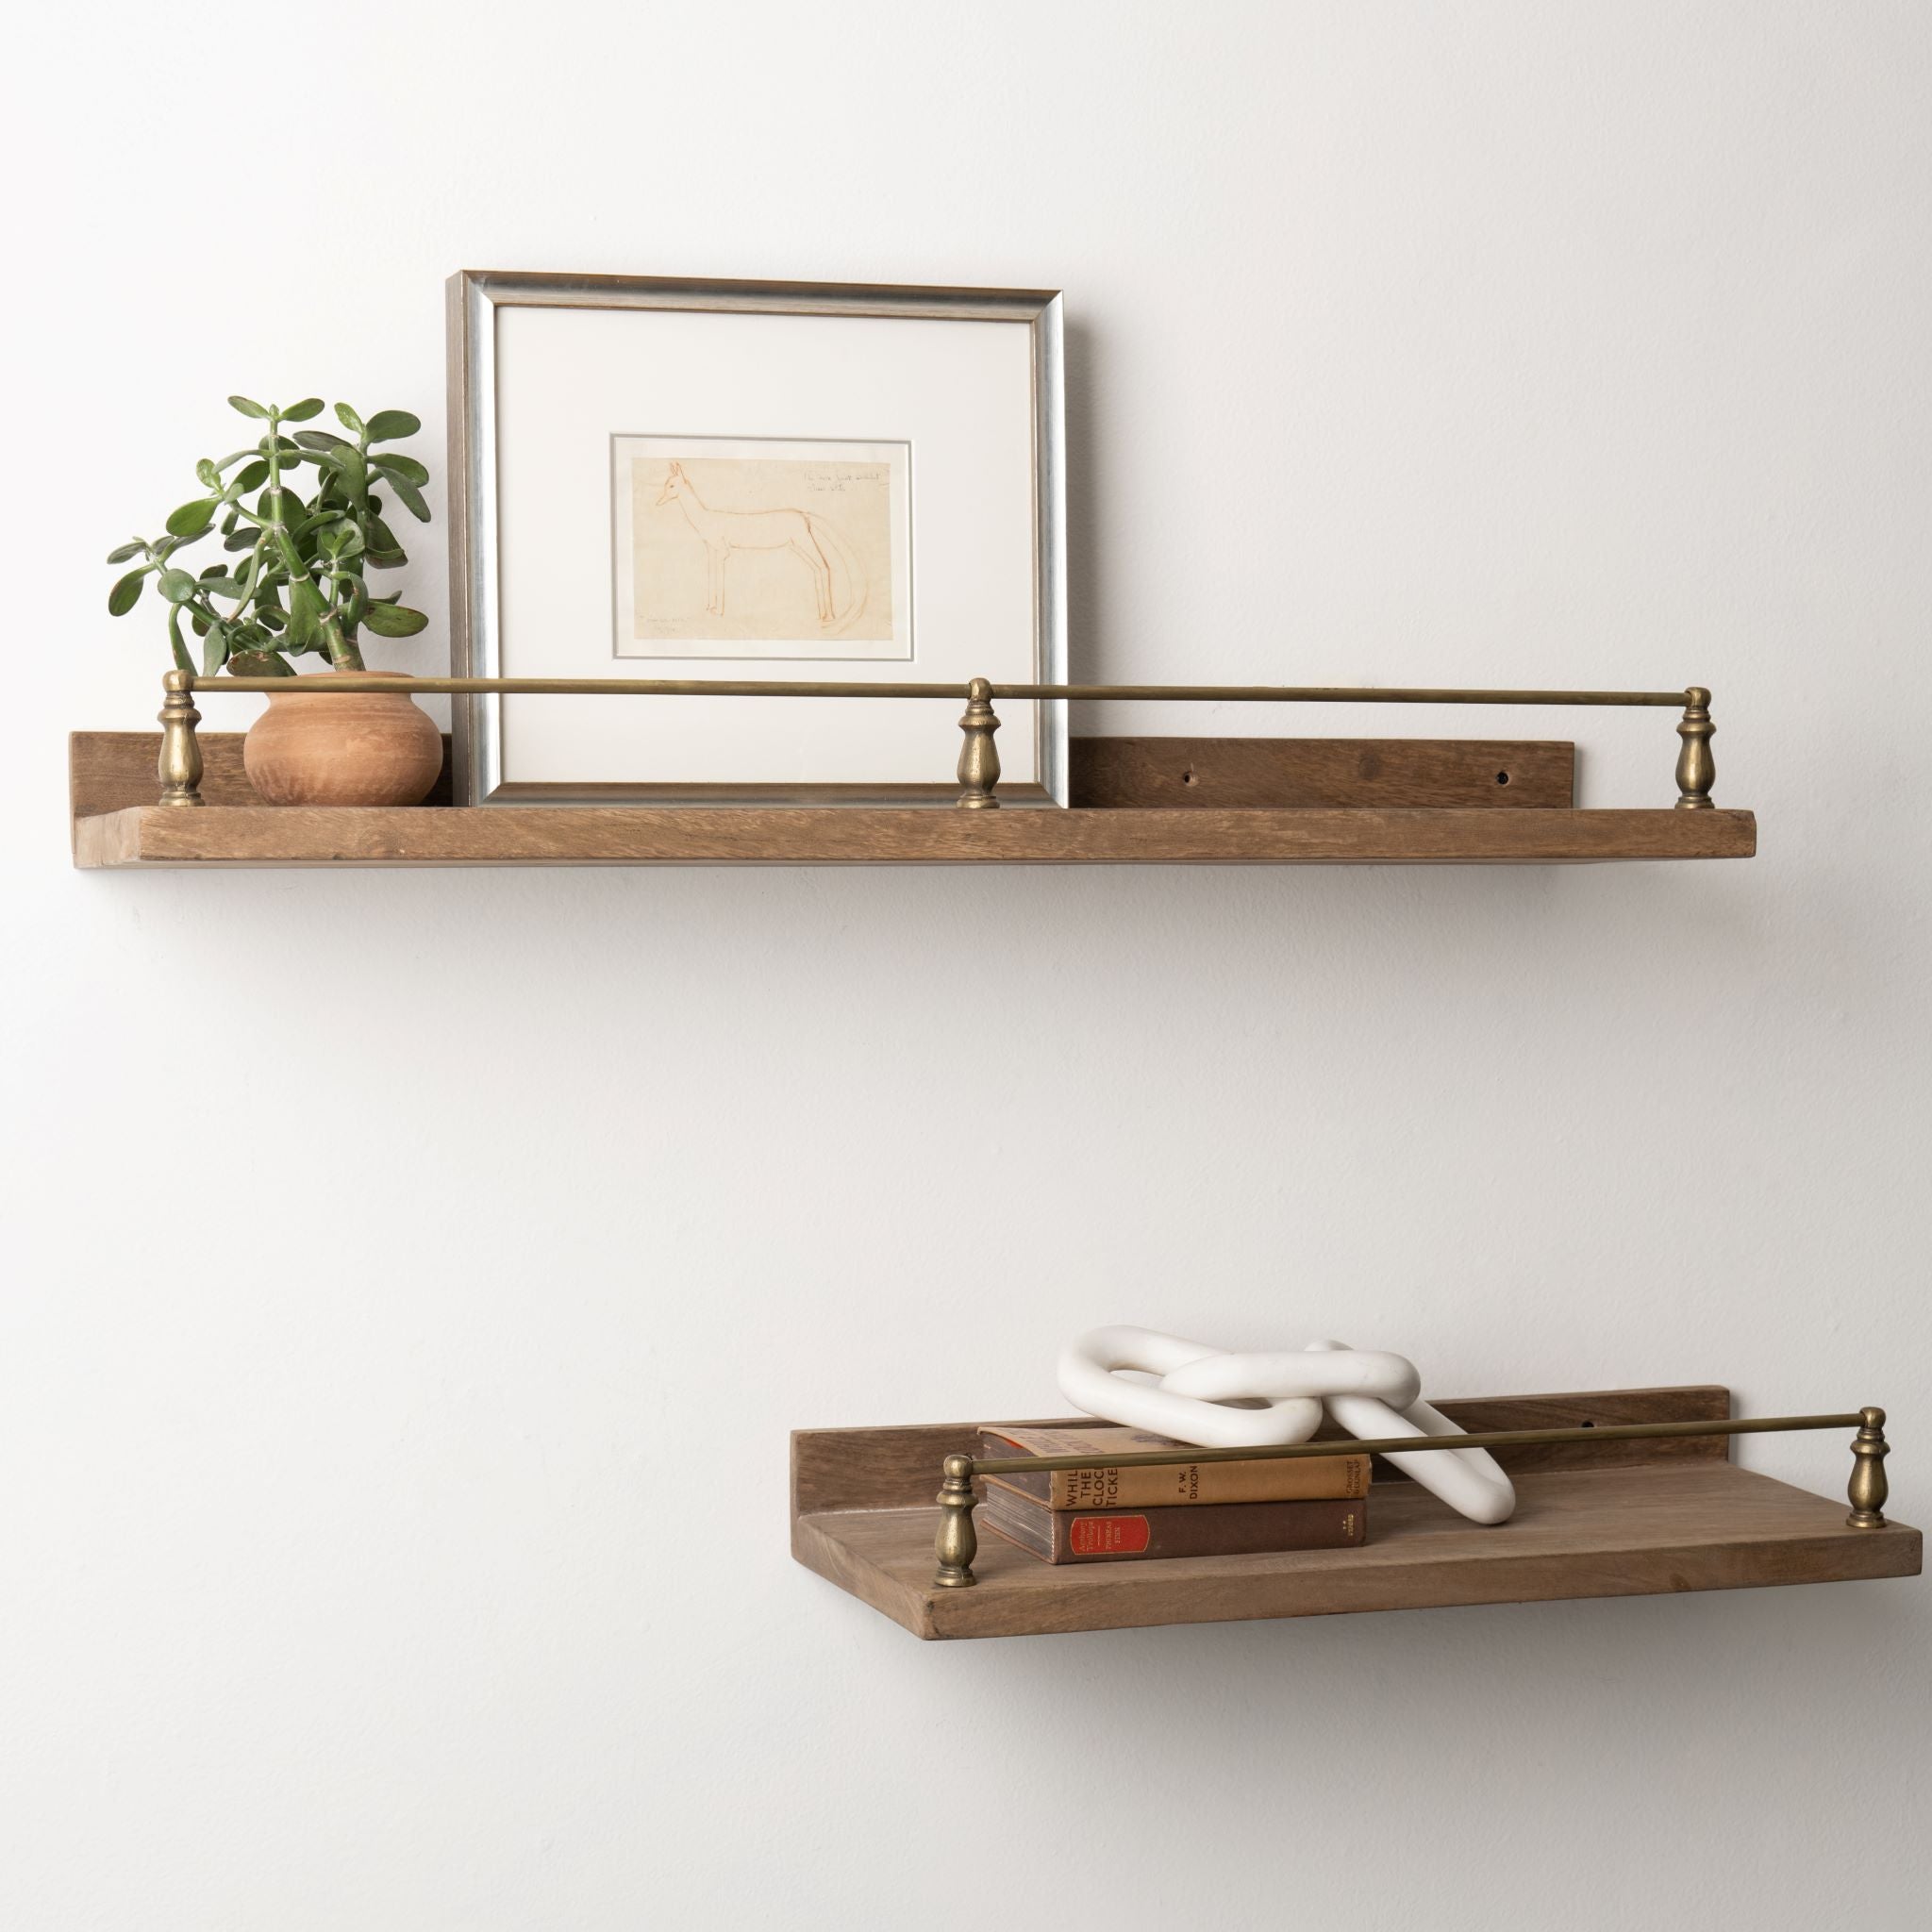 Magnolia Senna Wood and Brass Wall Shelf With Decor Items range from $90.00 to $120.00